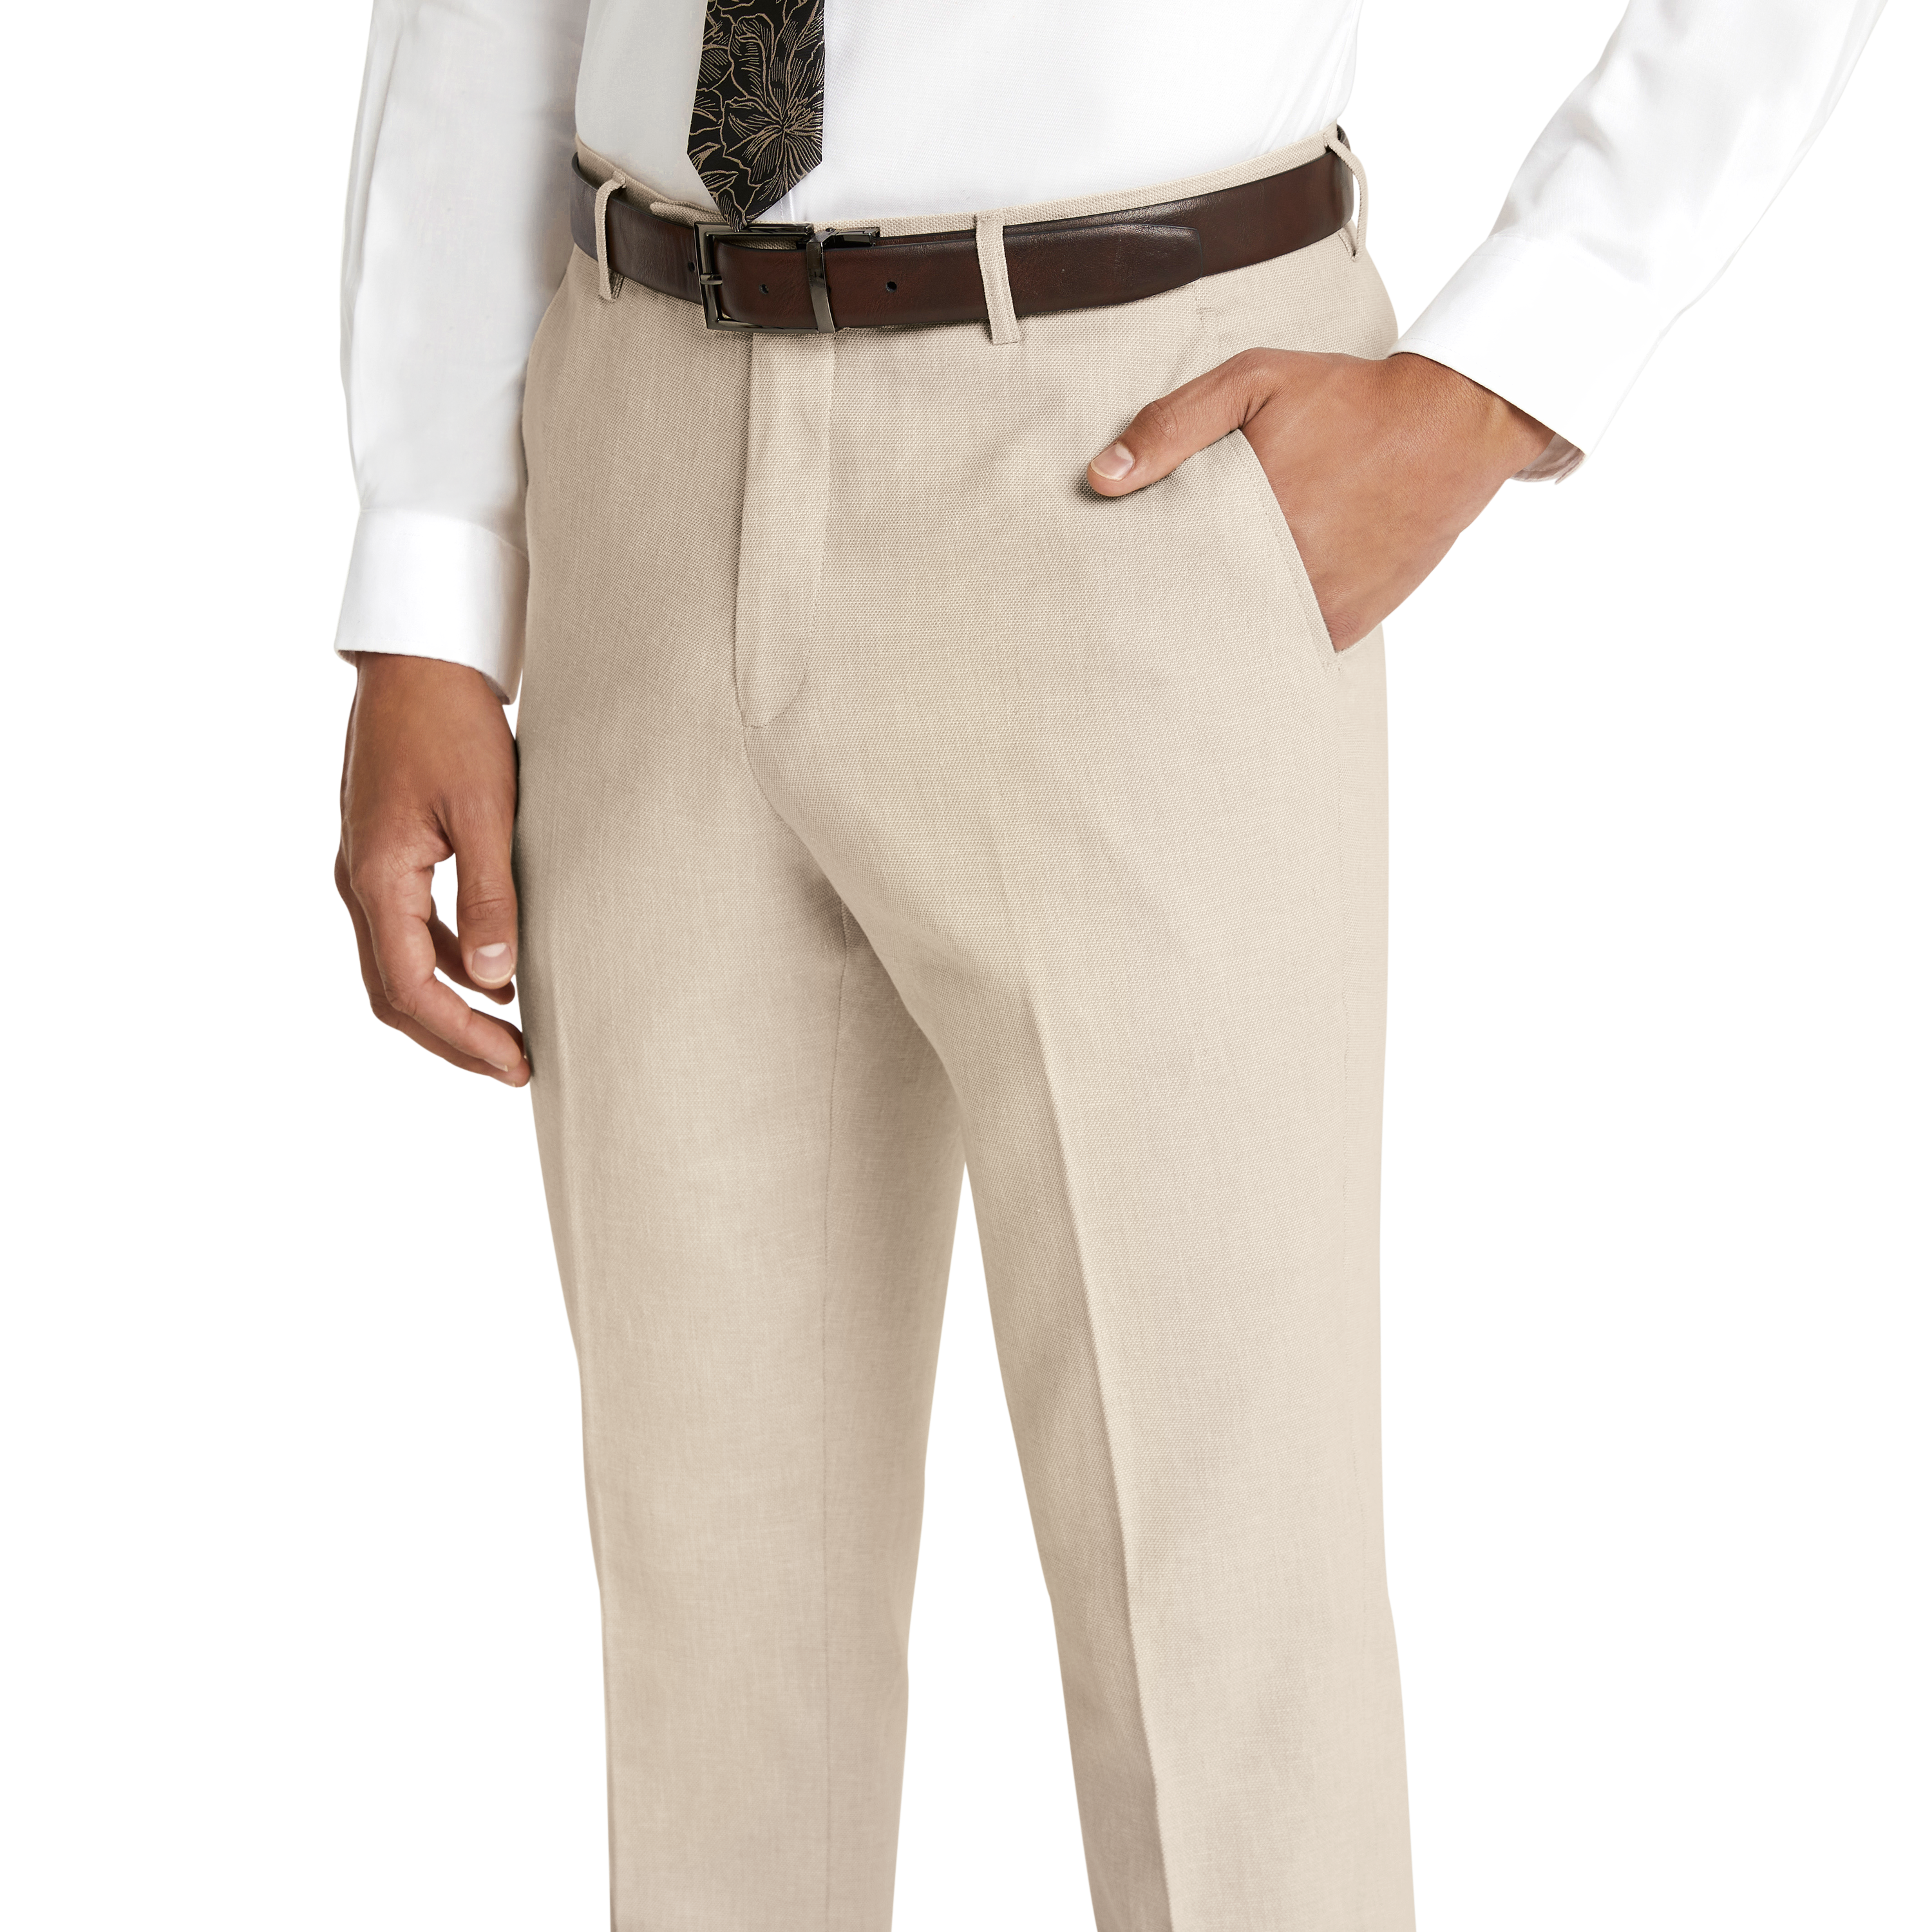 Stafford Mens Stretch Fabric Classic Fit Suit Pants, Color: Light Tan -  JCPenney